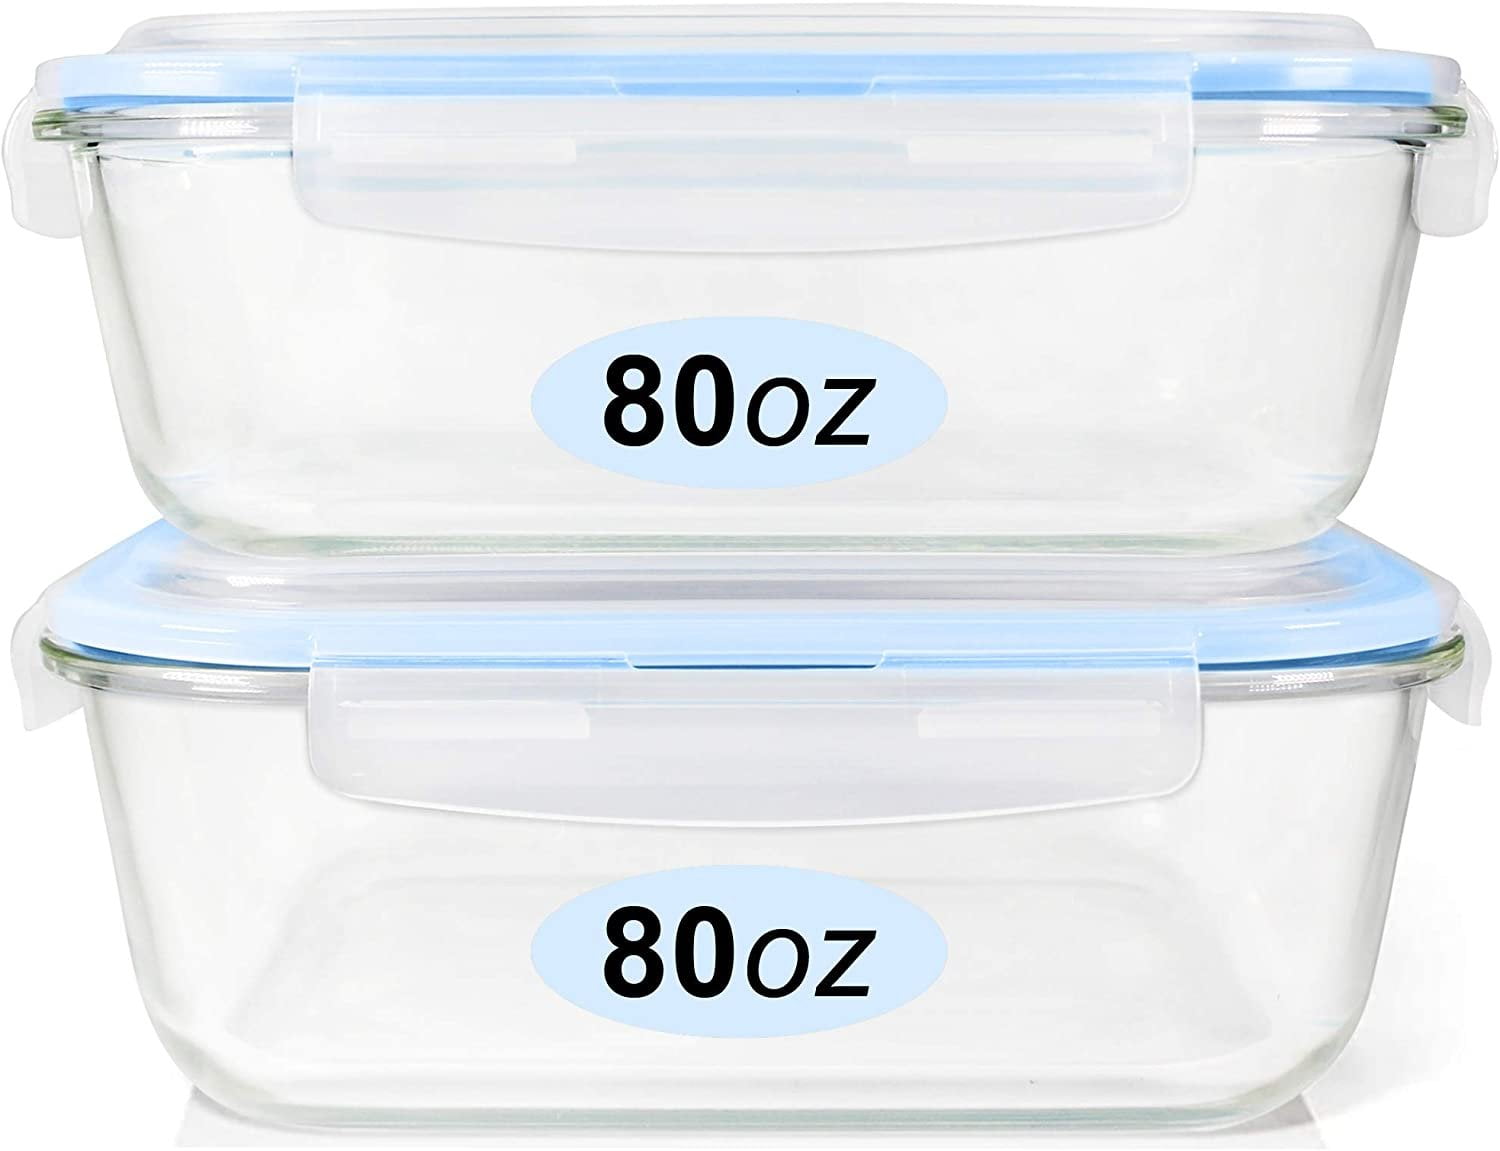 11.5 Cup/ 92 oz LARGE Glass Food Storage Container with Locking